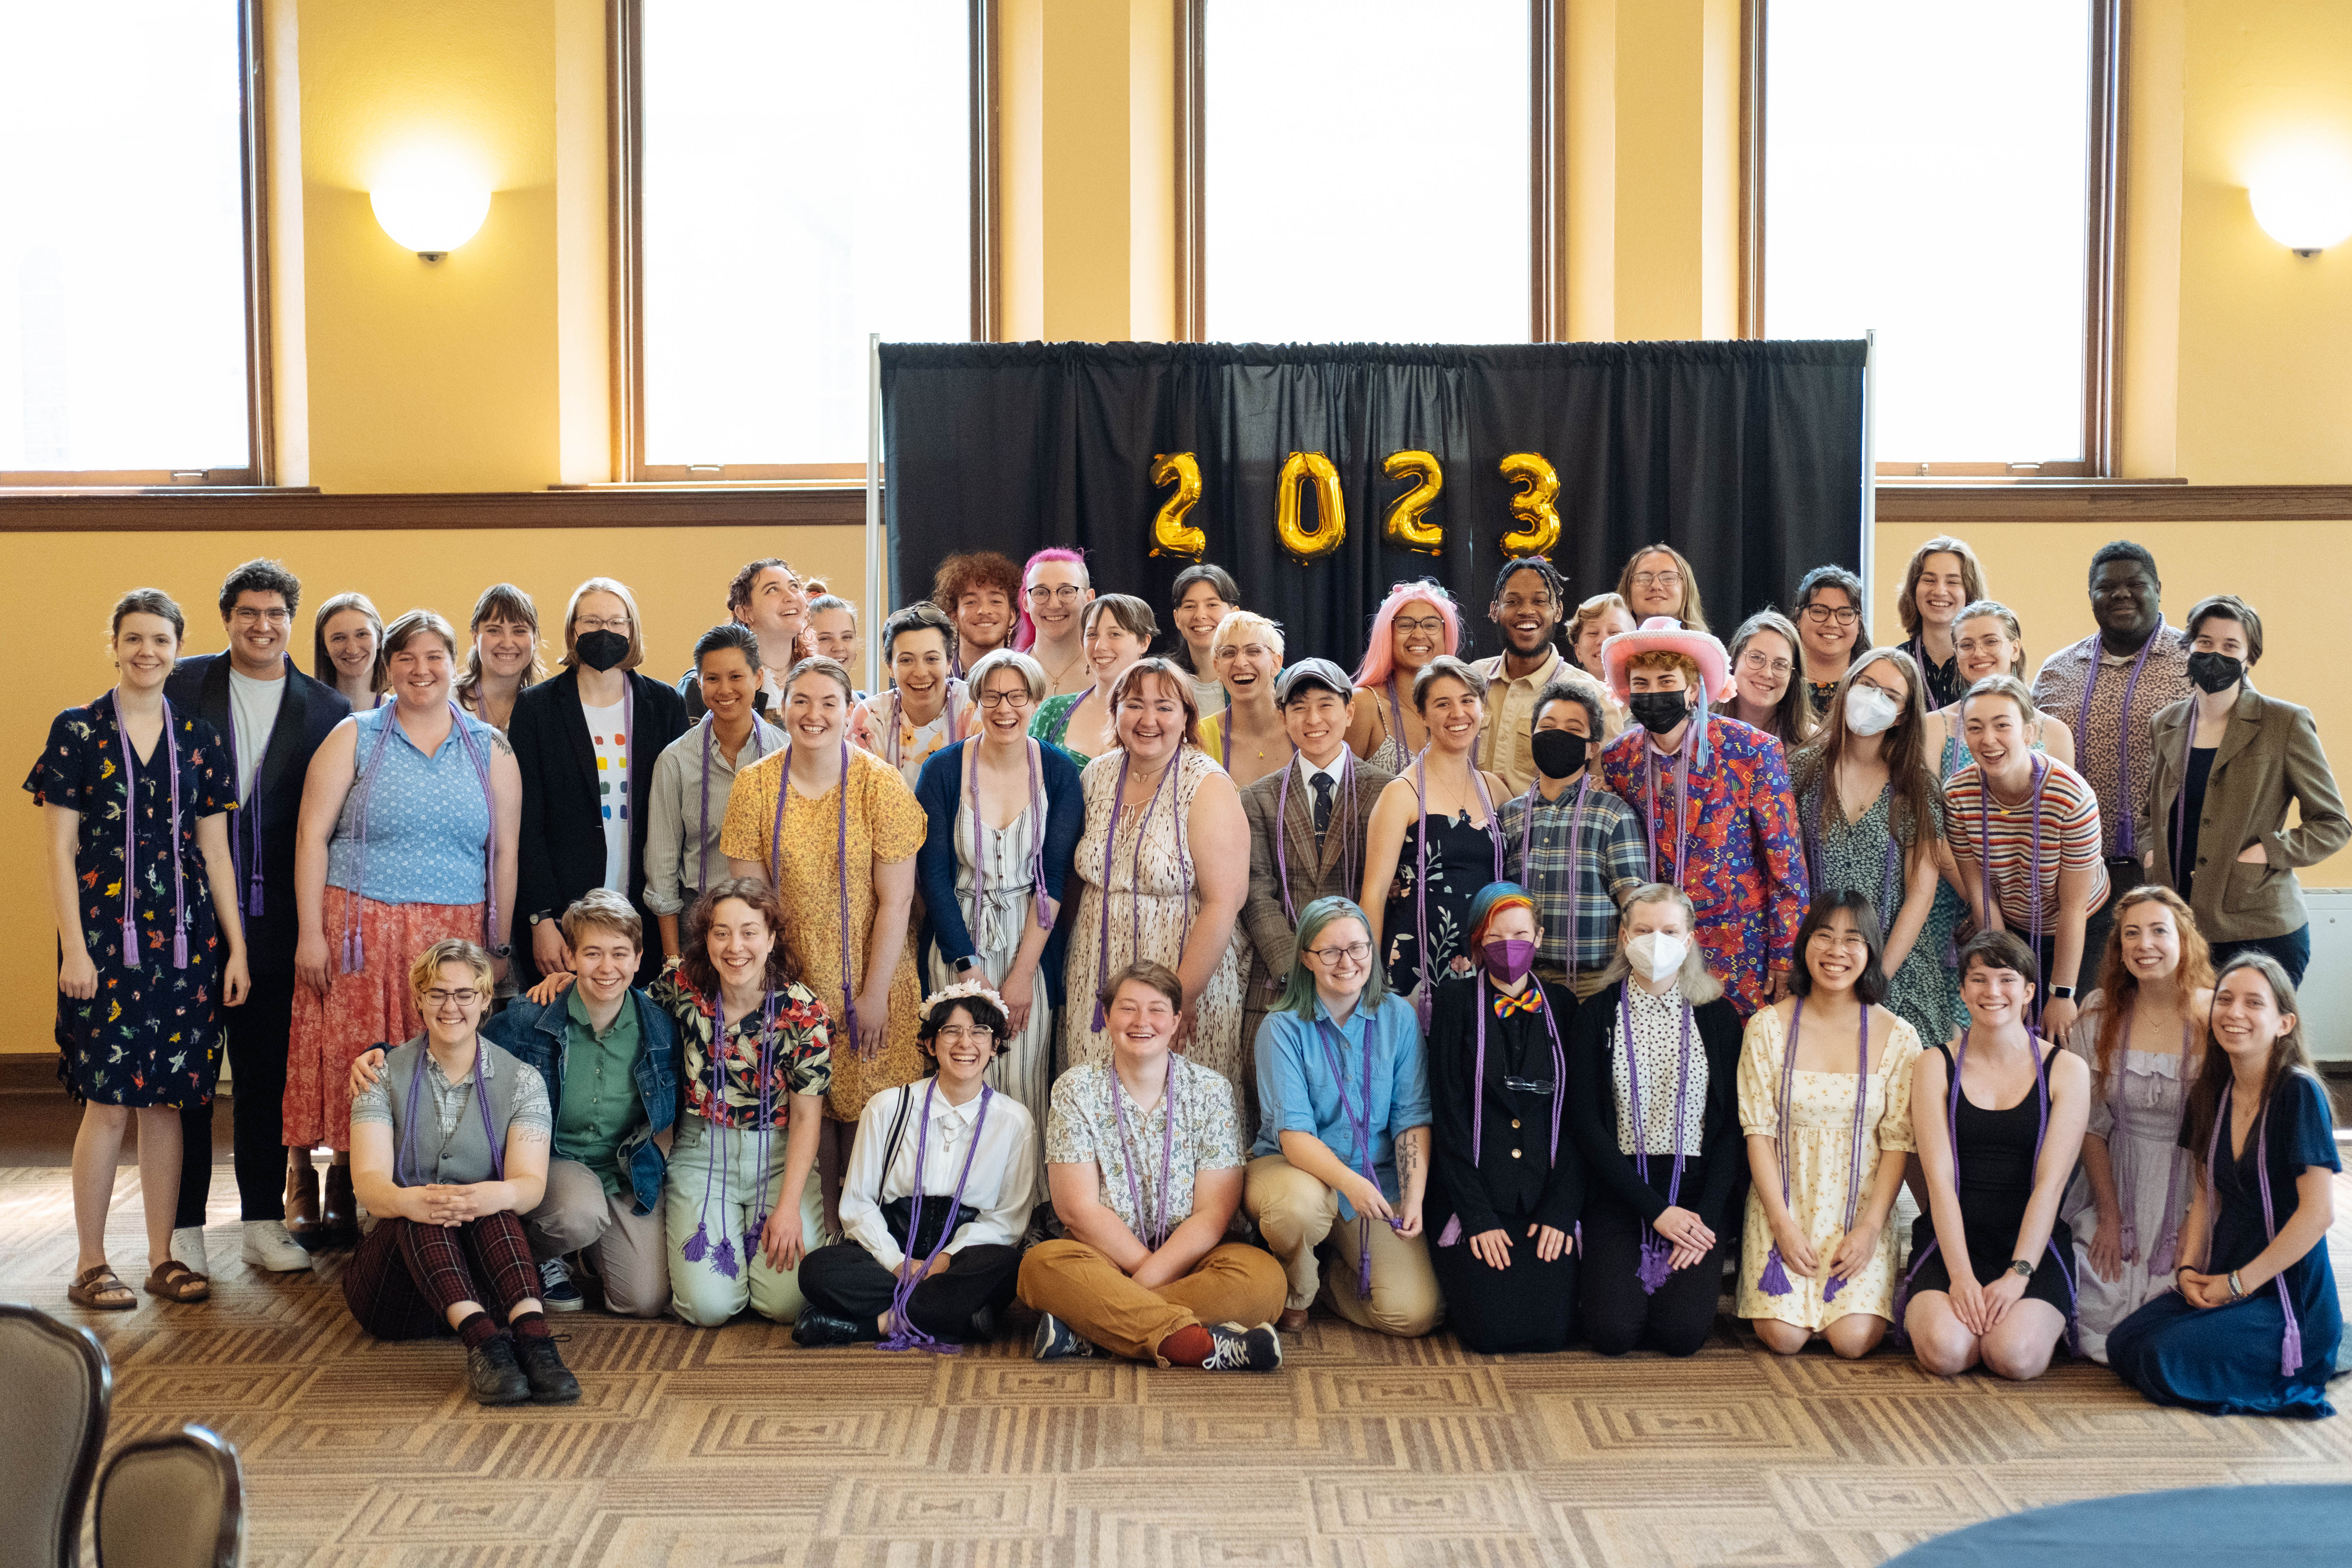 Group photo of the students who participated in Lavender Graduation Class of 2023.